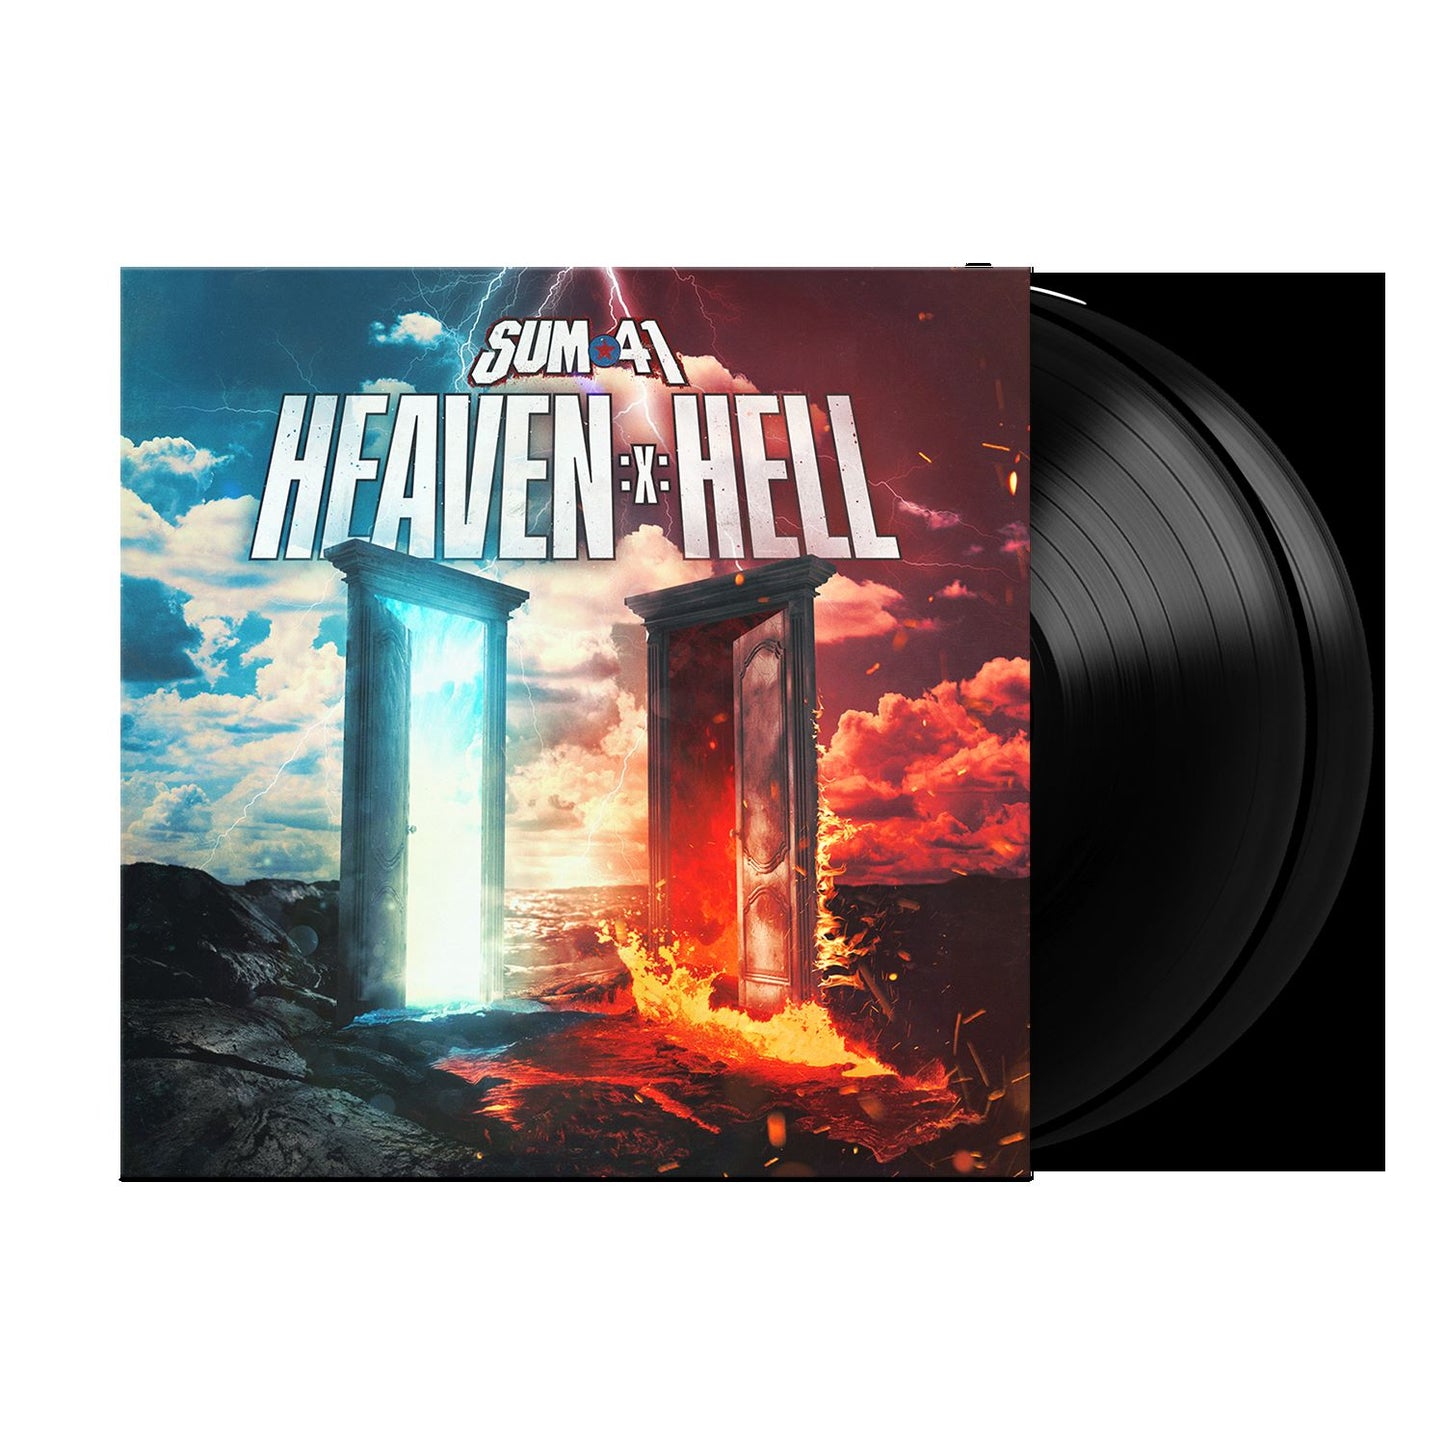 Sum 41 - Heaven x Hell (Out 29/3/24)